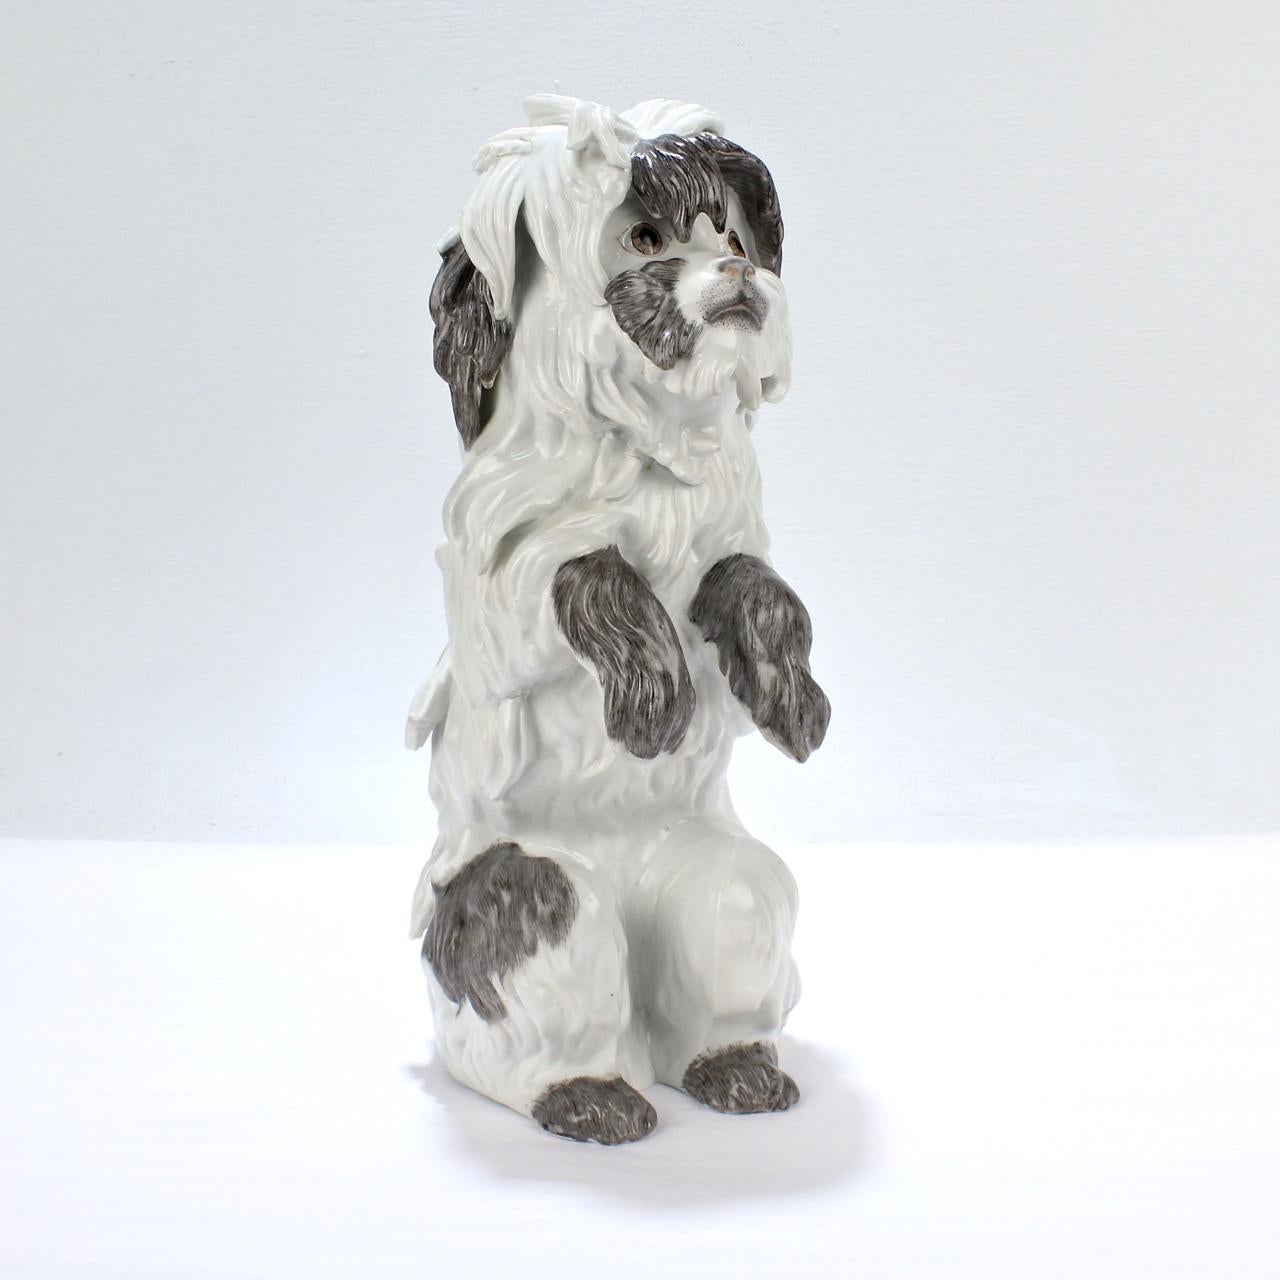 A fine Samson porcelain model of a Bolognese dog.

Modeled after the figurines that Kaendler designed for Meissen in 18th century.

A classic form that is always in style!

The reverse has a blue underglaze factory mark for Samson & Cie